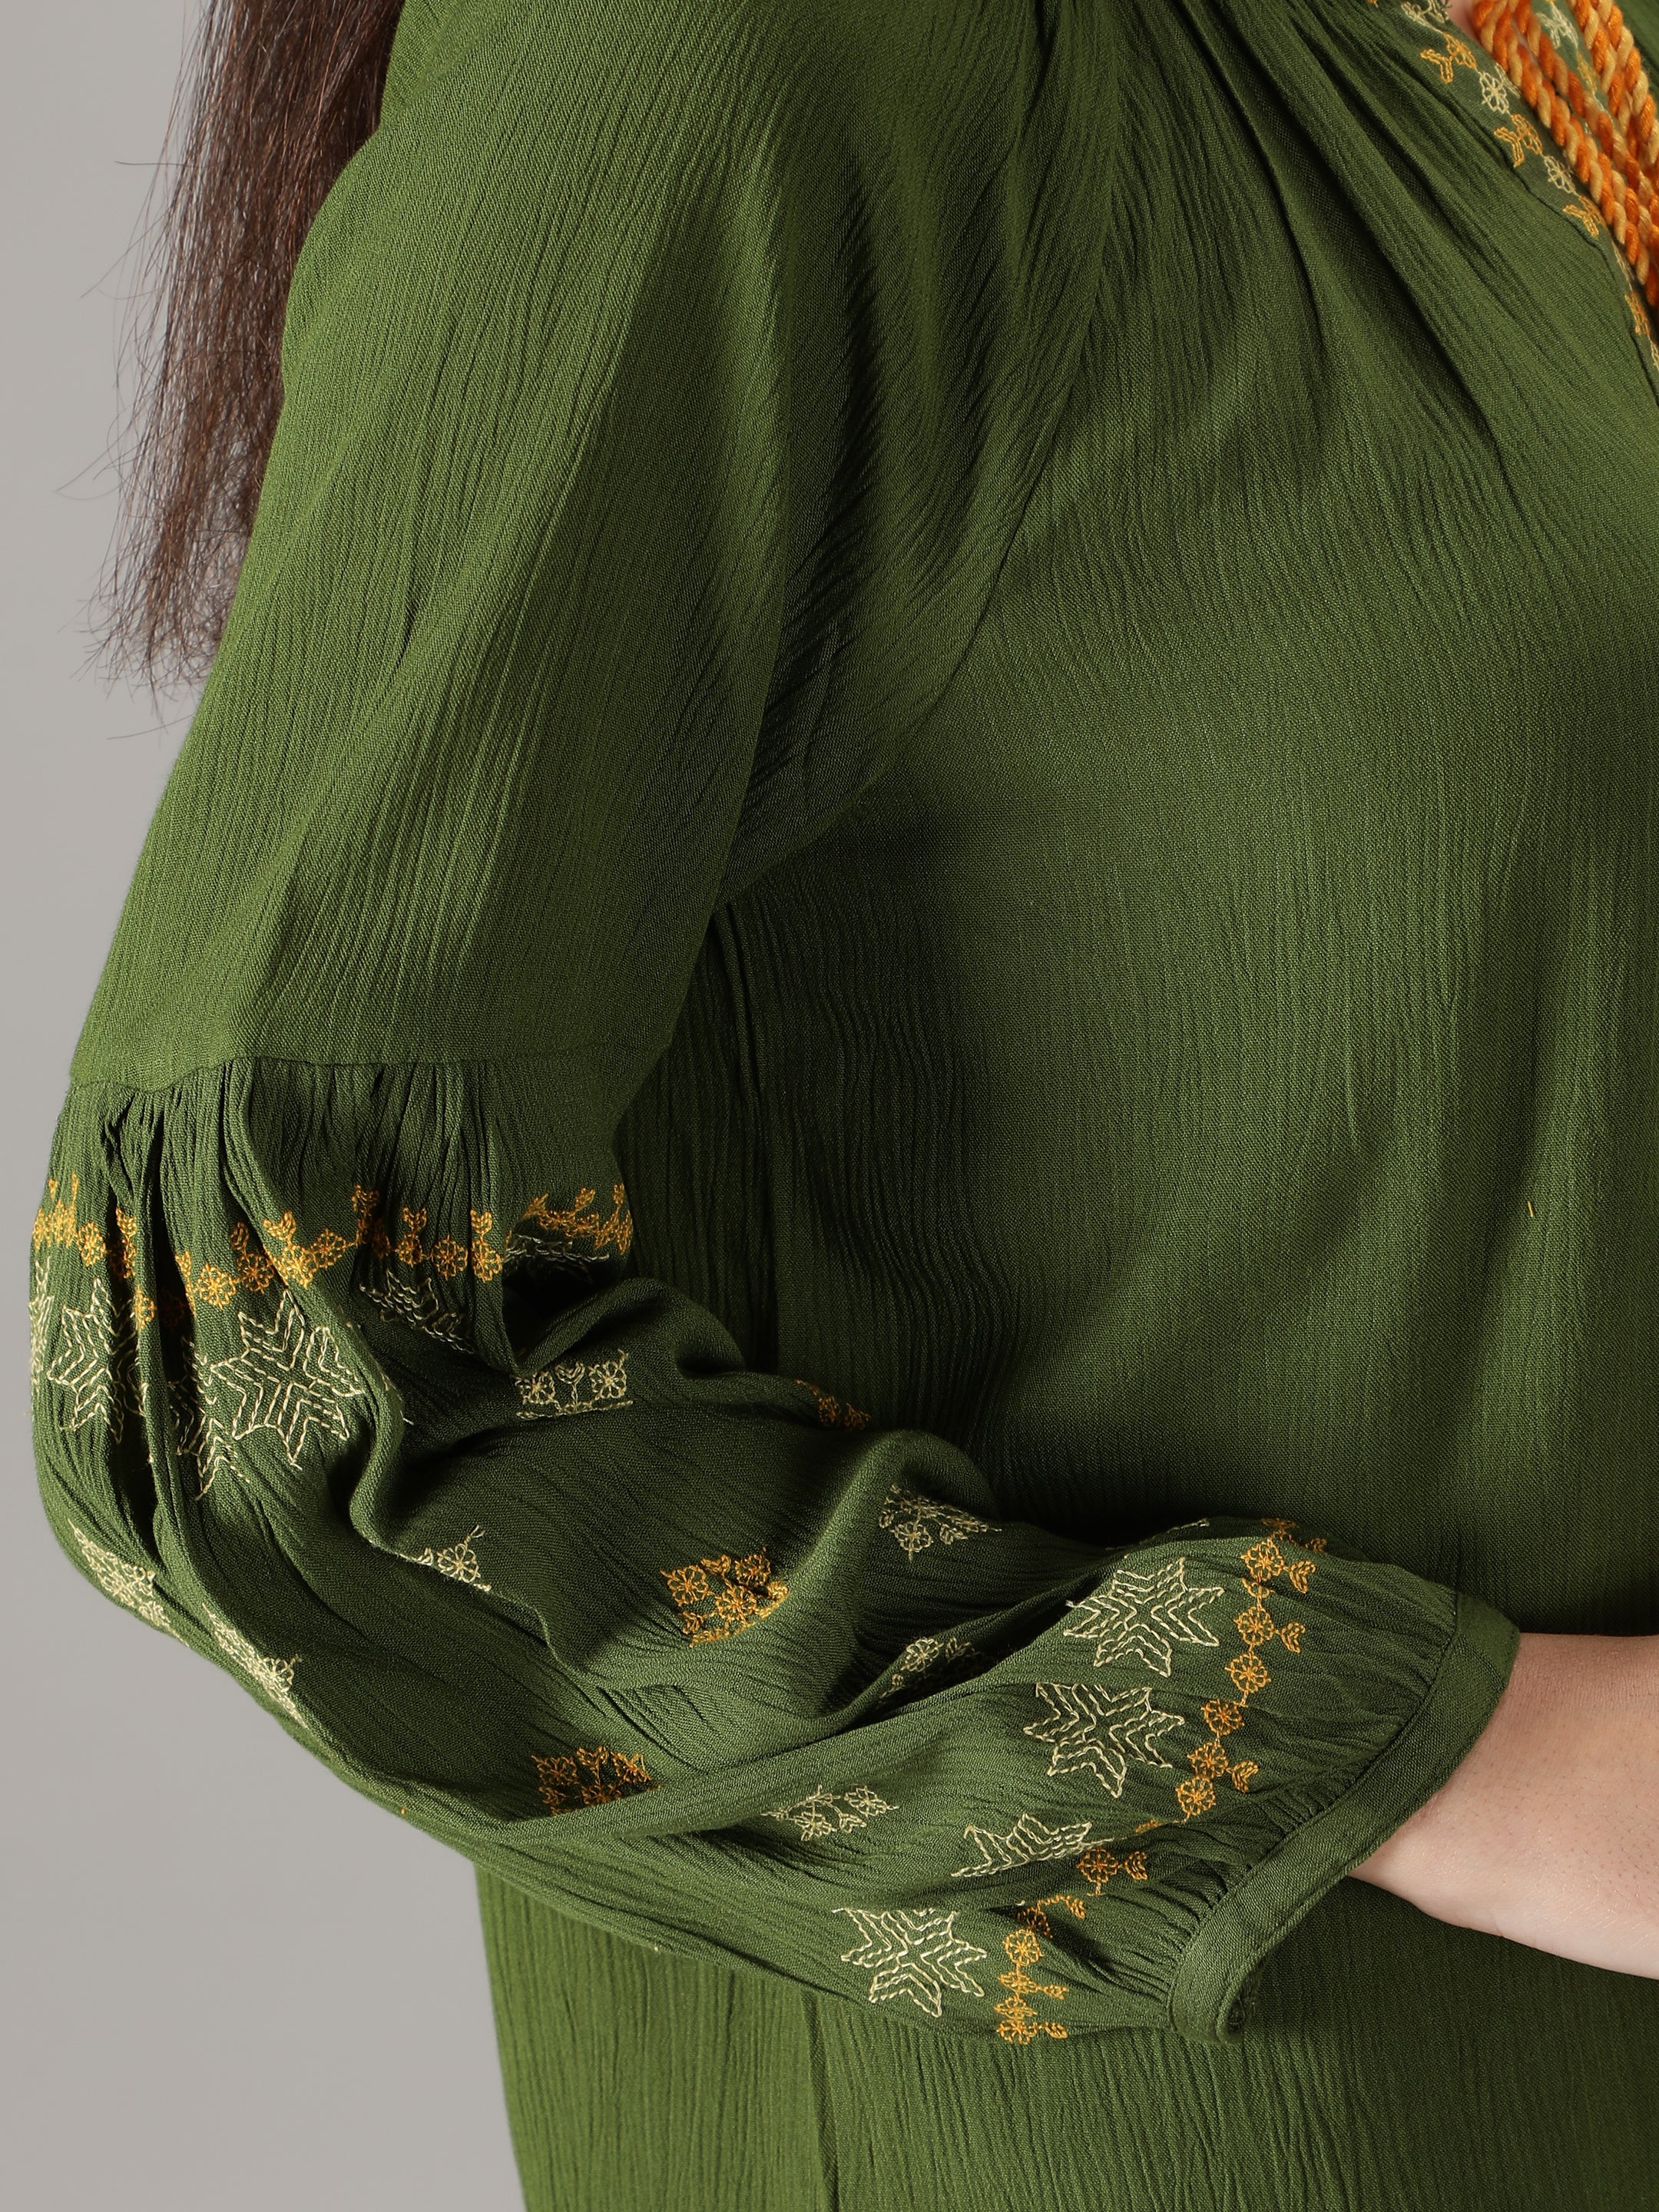 green-embroidered-top-with-tie-ups